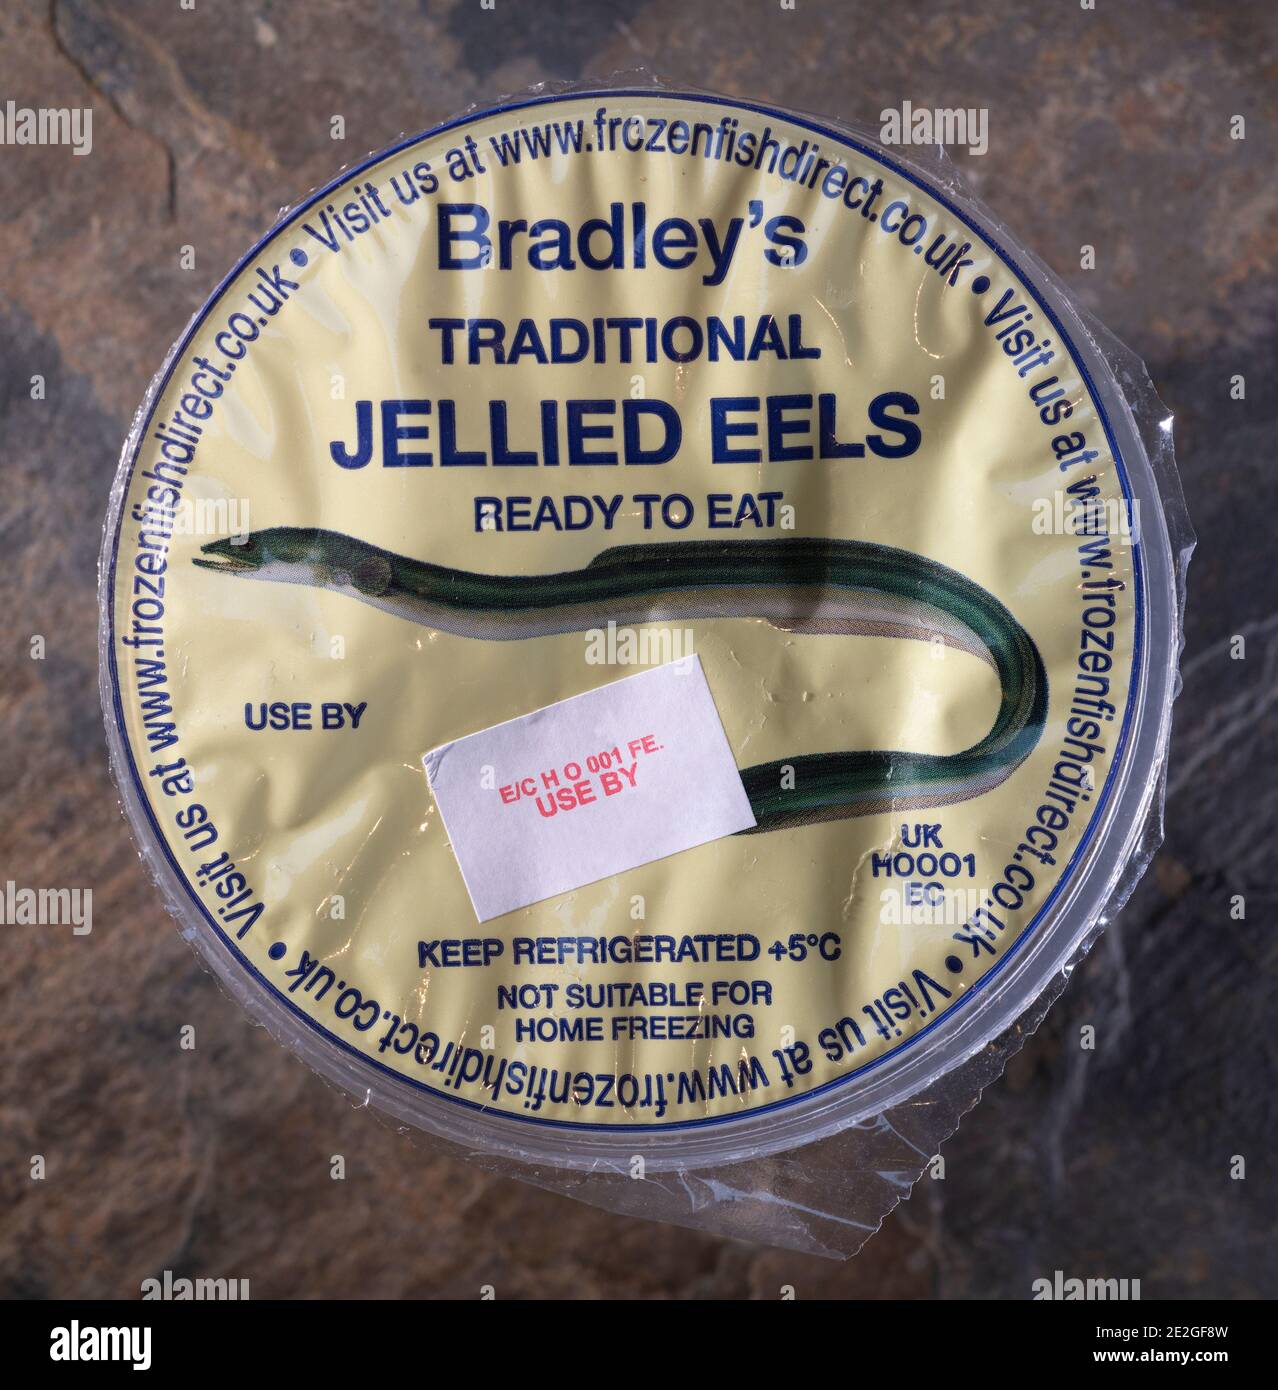 Traditional Jellied Eels branded food packaging Stock Photo